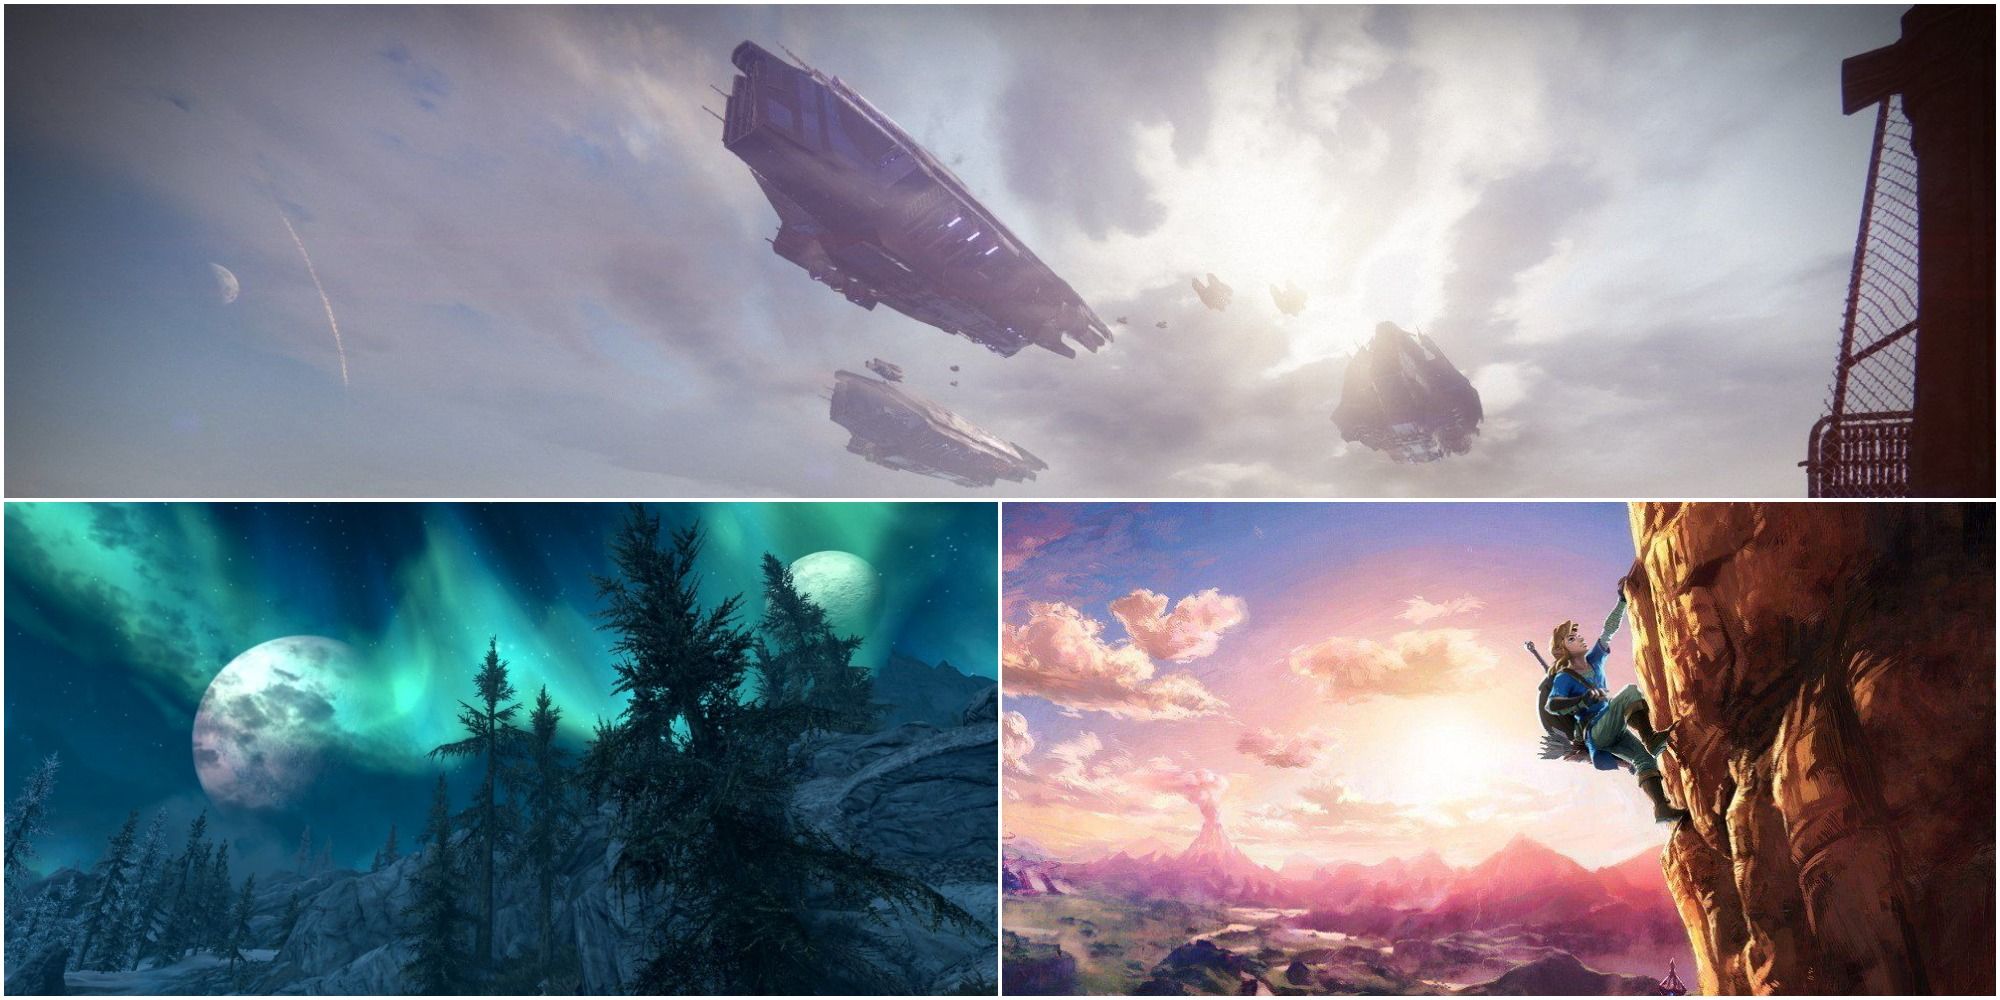 On the top, the sky of the Cosmodrome in Destiny, the bottom left, the aurora and moons in Skyrim, the bottom right, art of Link climbing a mountain in Breath of the Wild